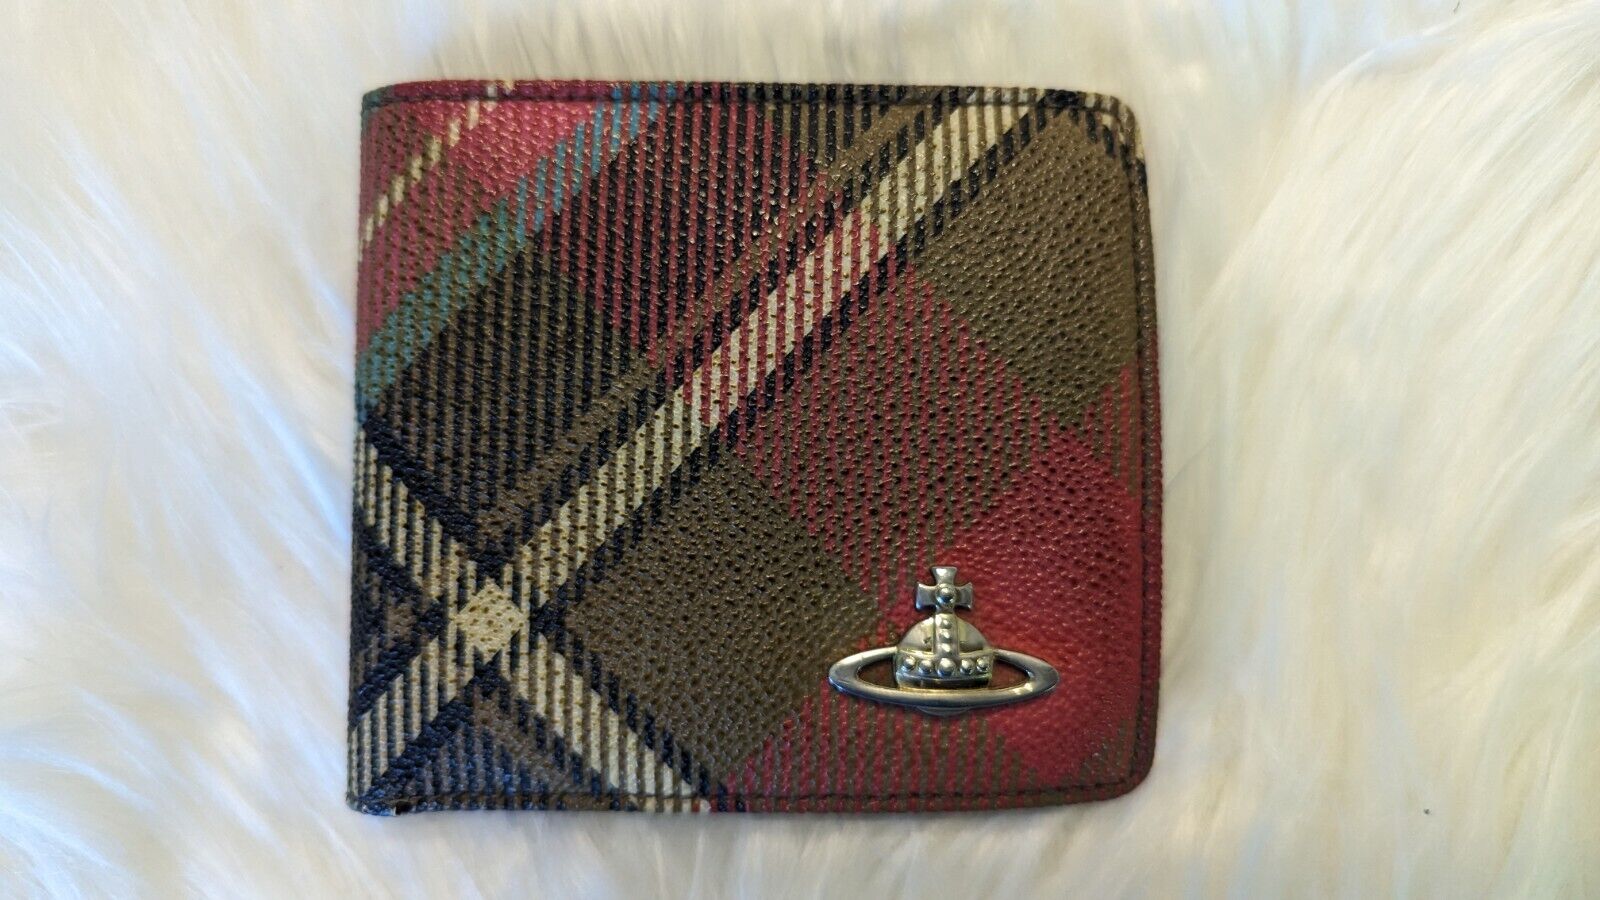 Vivienne Westwood Tiny Orb Bifold Wallet Plaid Leather Italy great condition